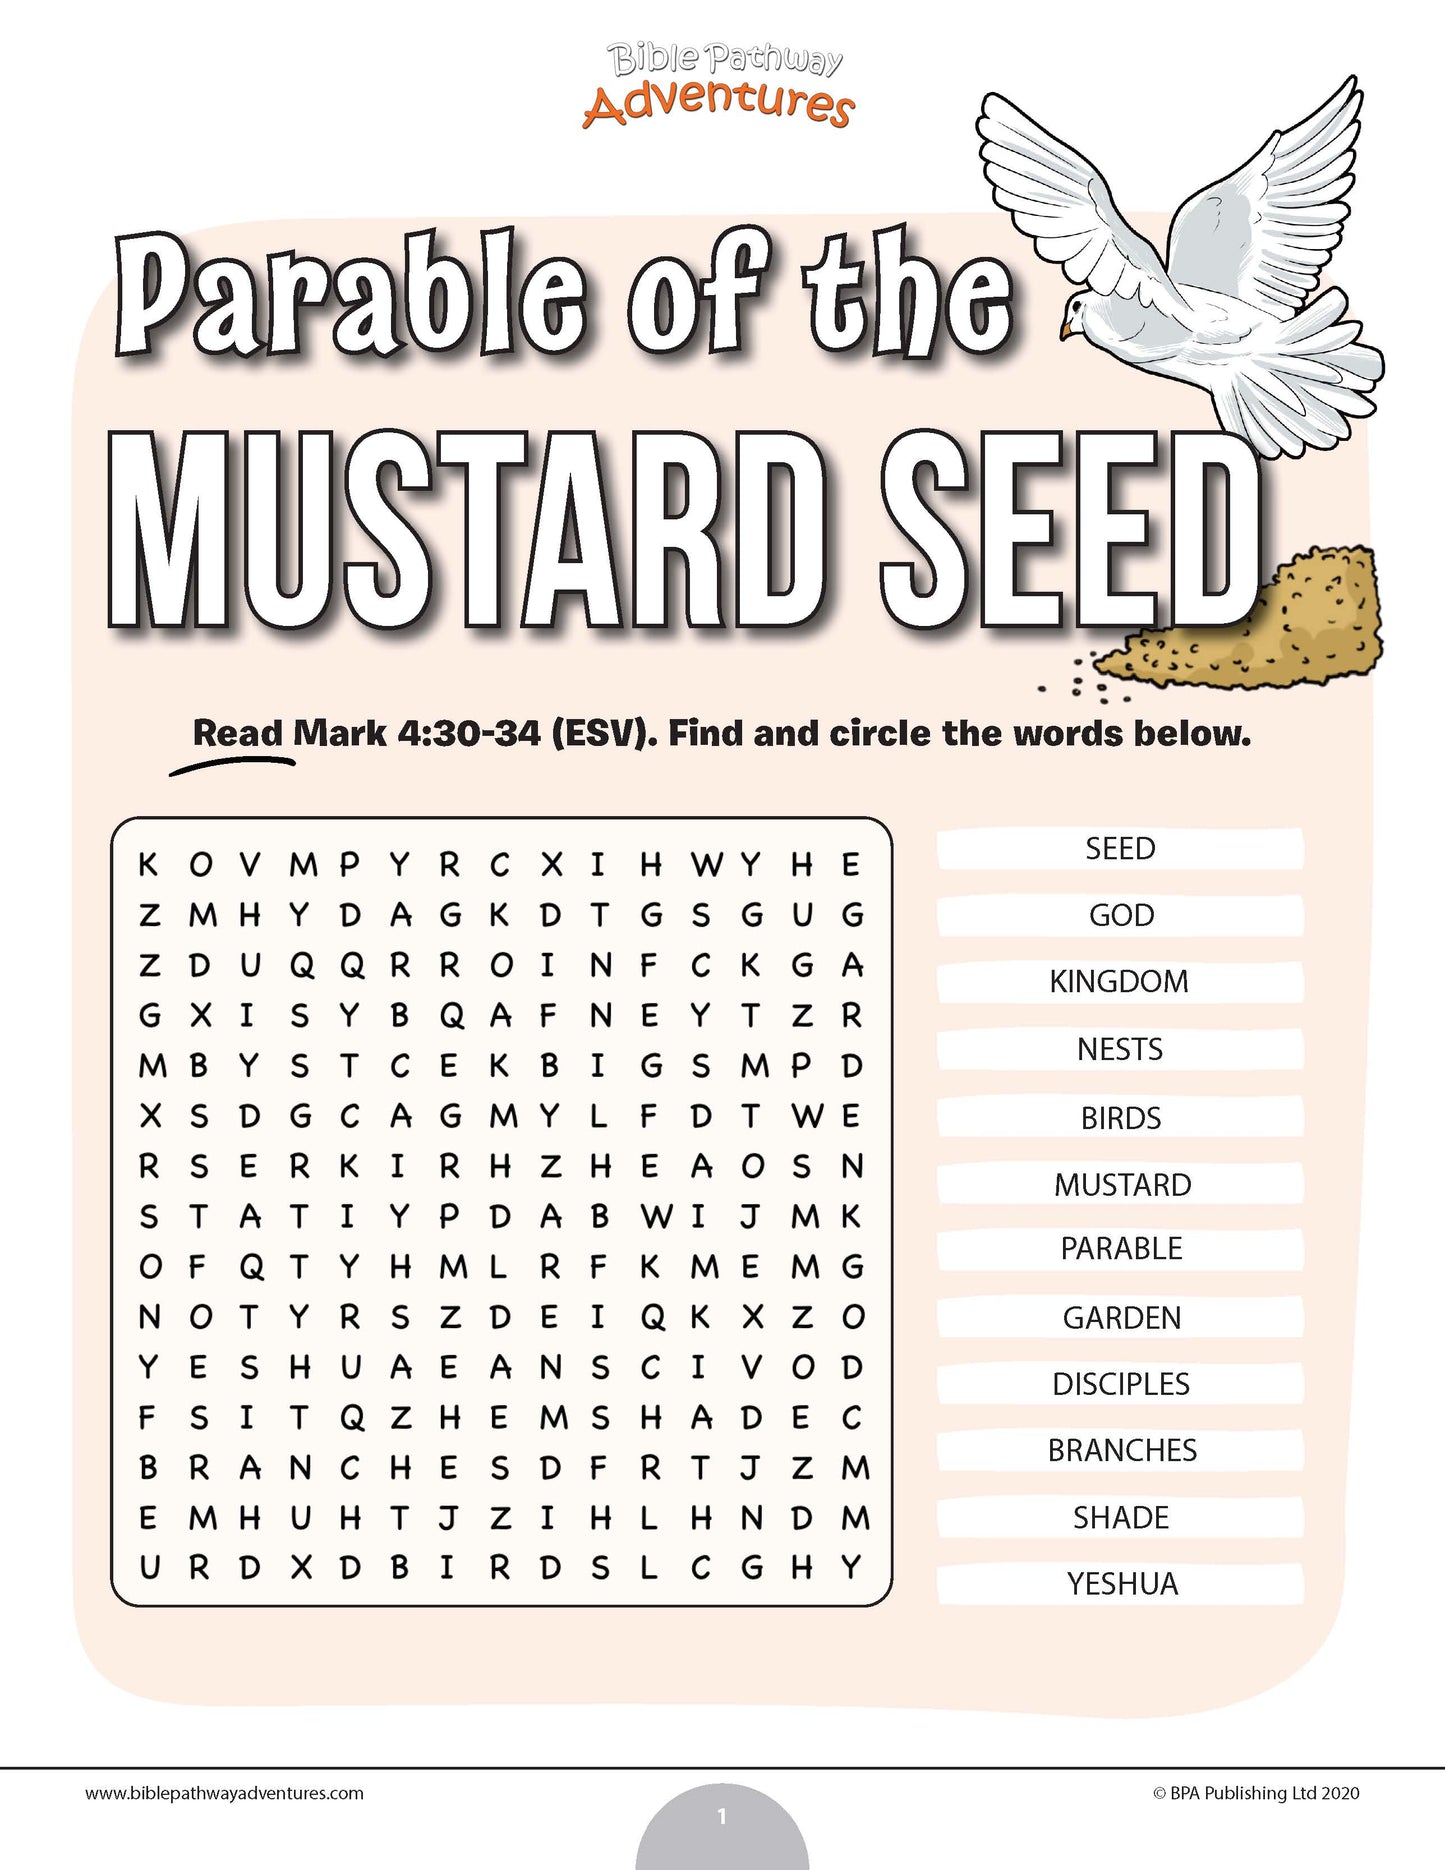 Parable of the Mustard Seed word search